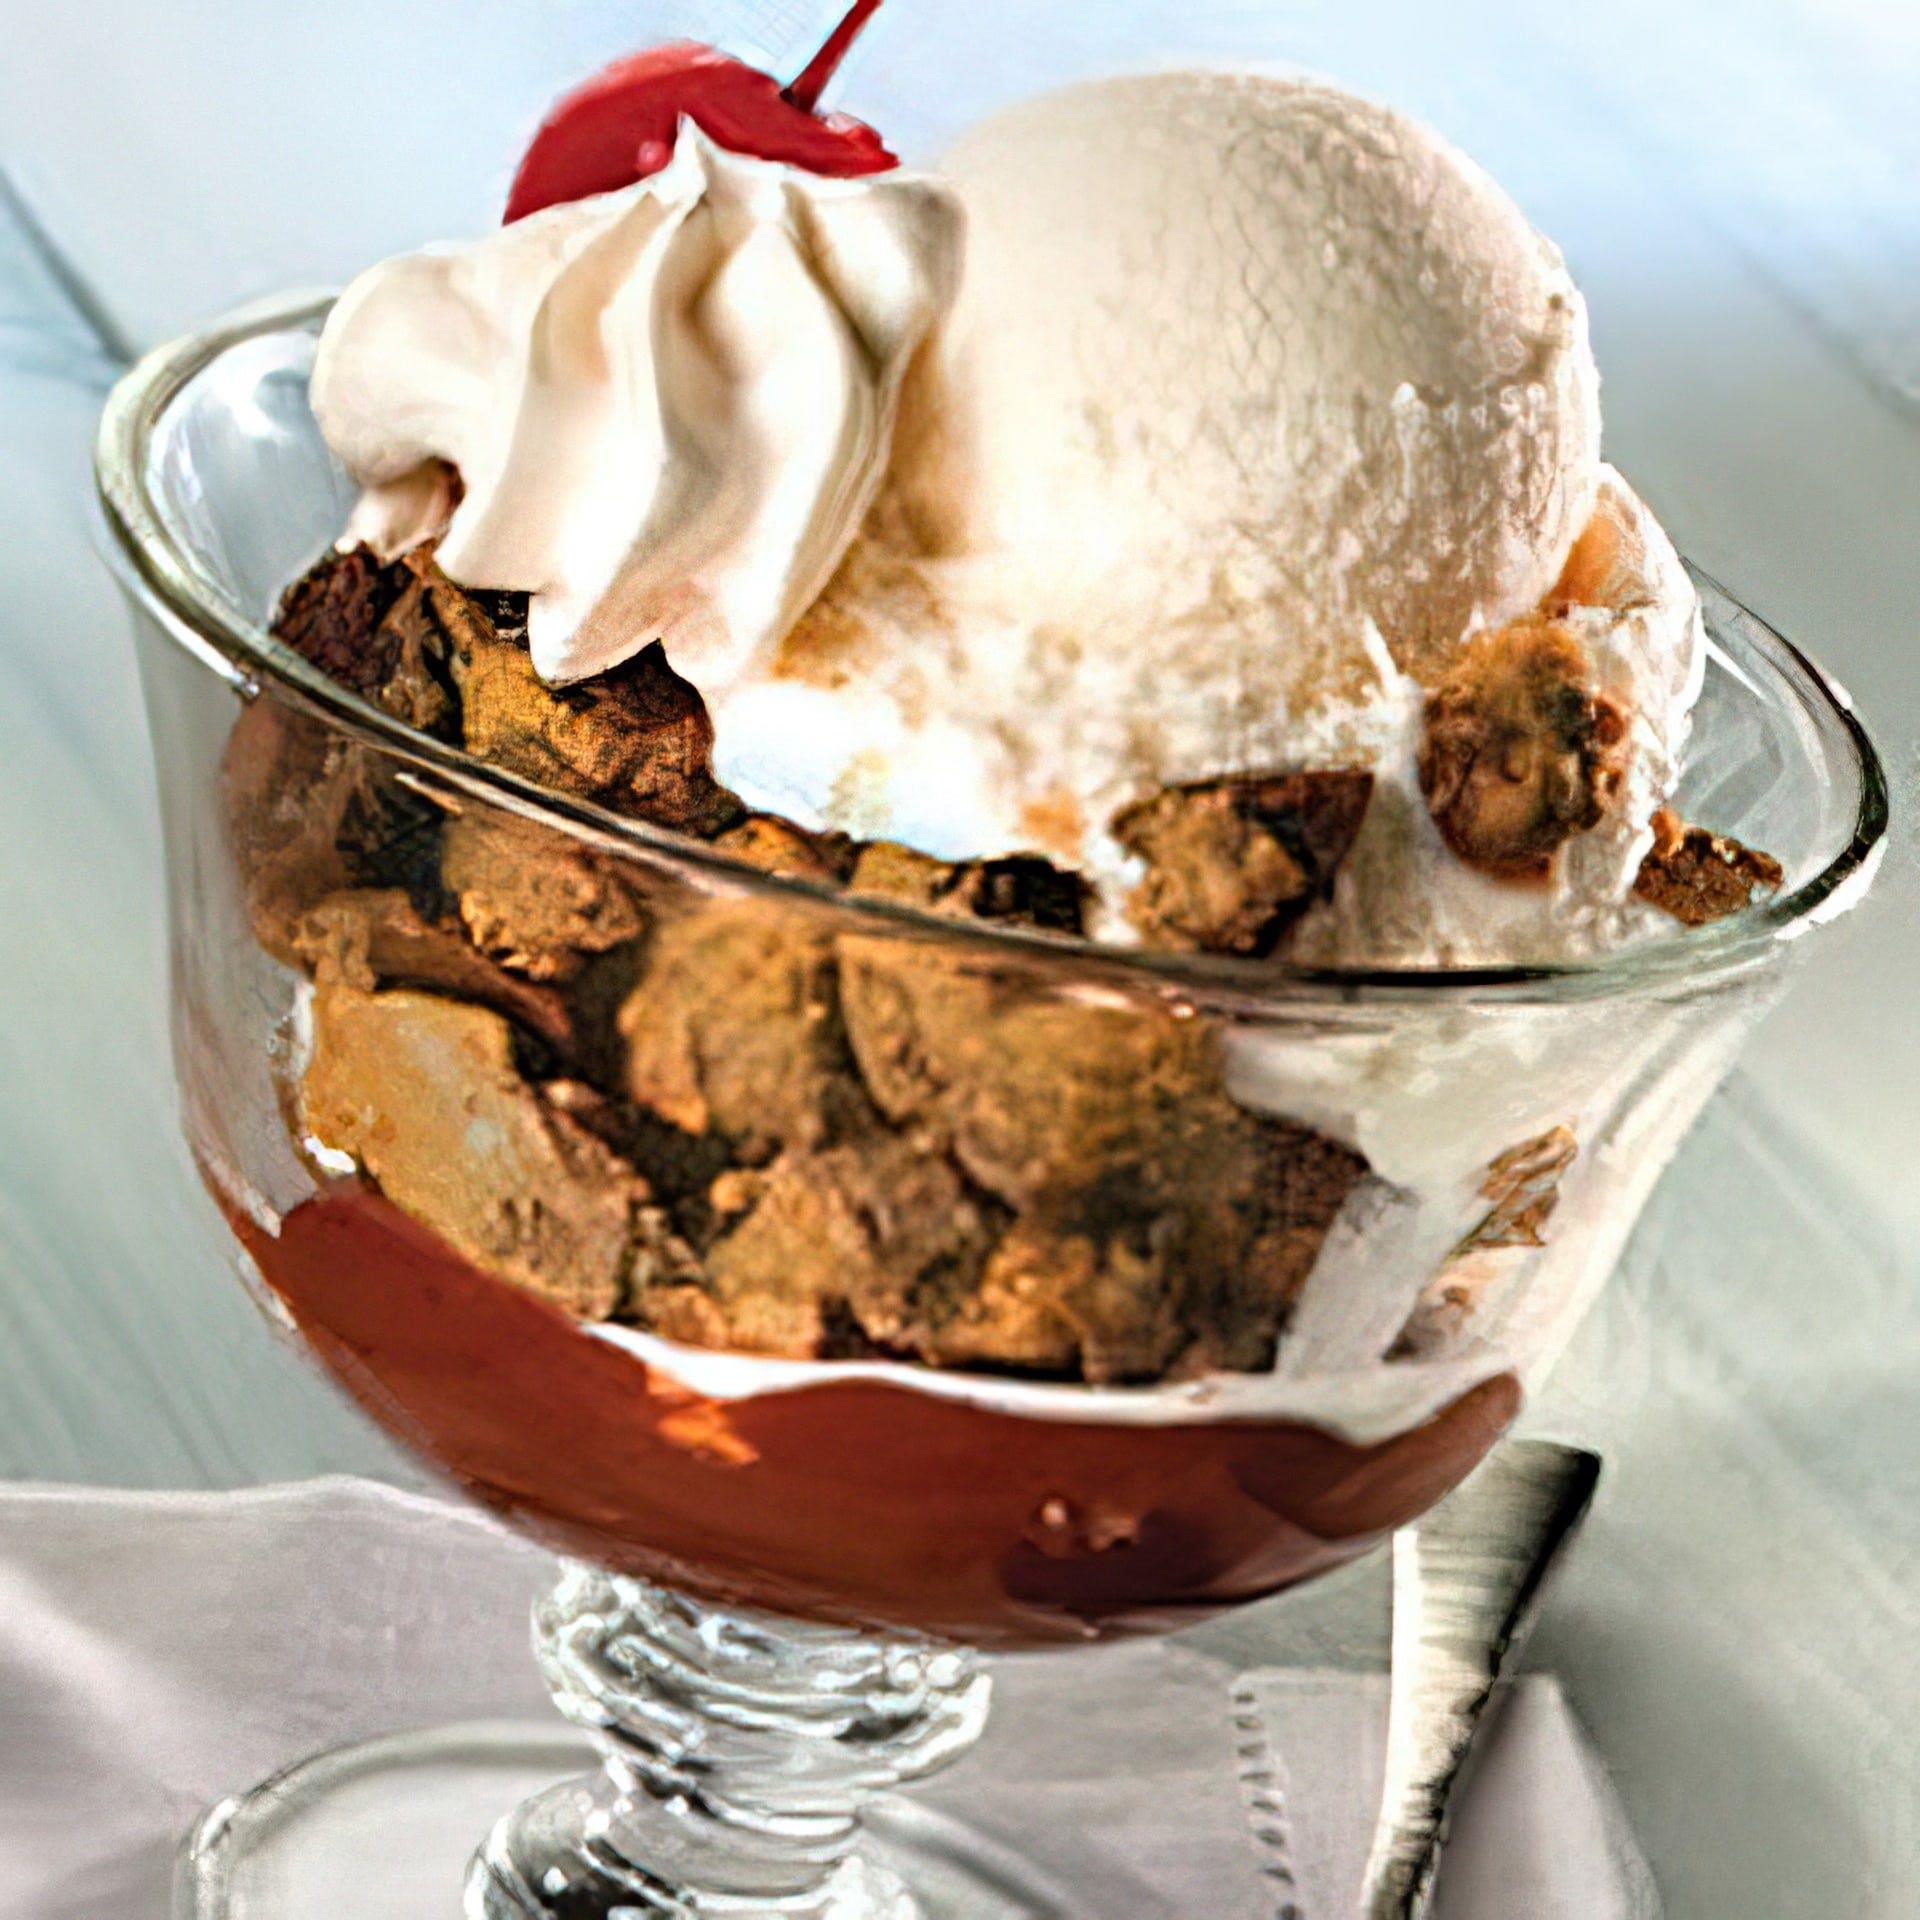 Chopped REESE'S Peanut Butter Cup Sundae